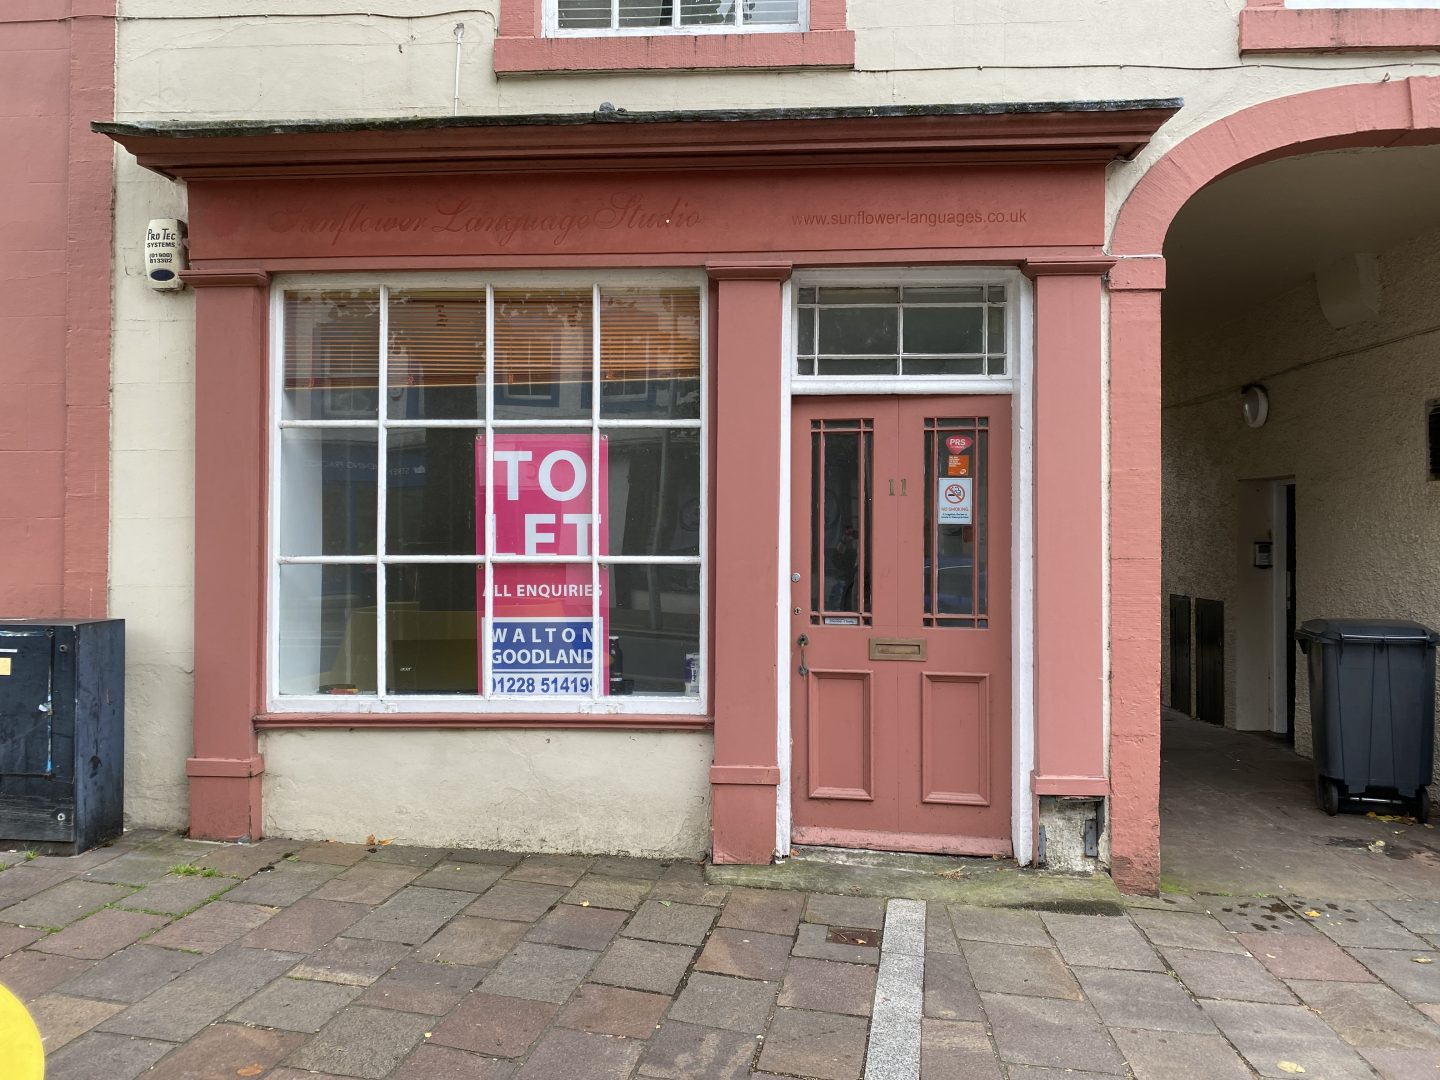 11 Market Place, Cockermouth – UNDER OFFER